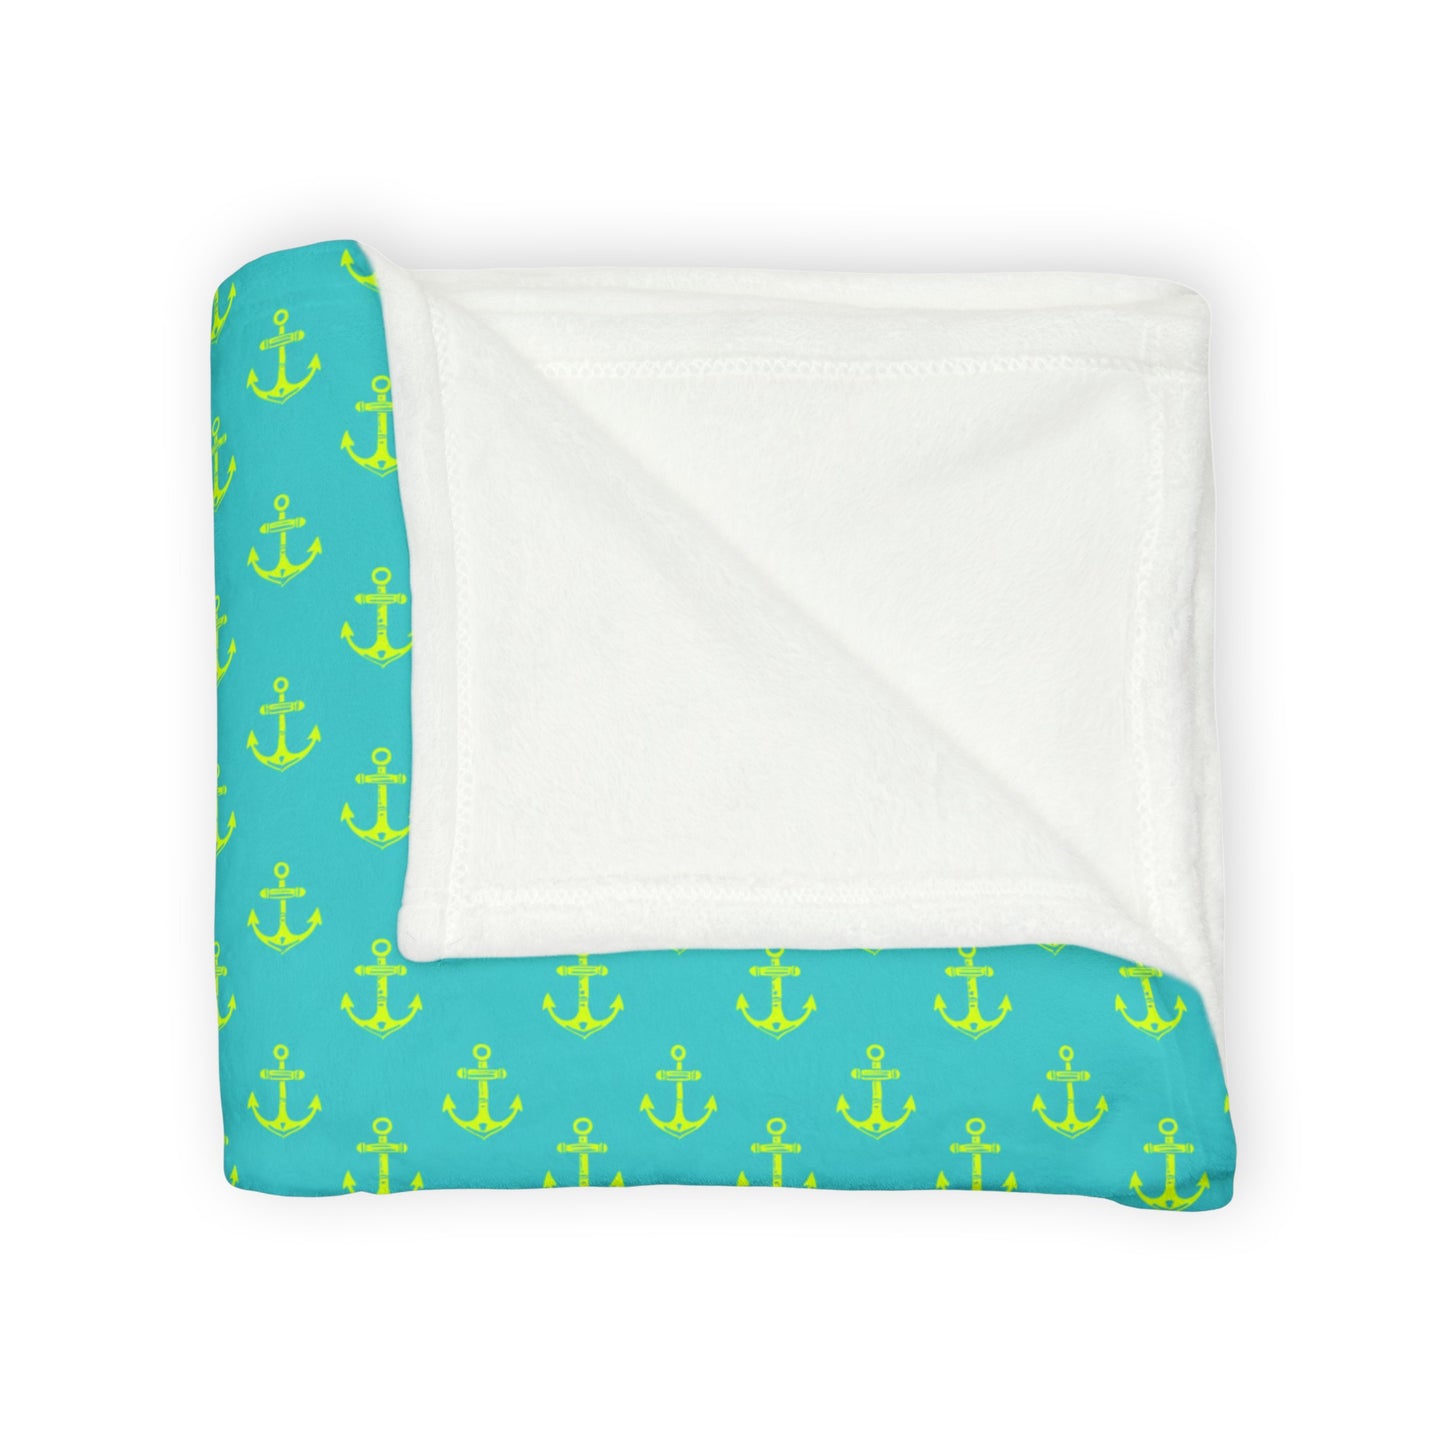 Anchors Away Surface Beach Volleyball Club Soft Polyester Blanket